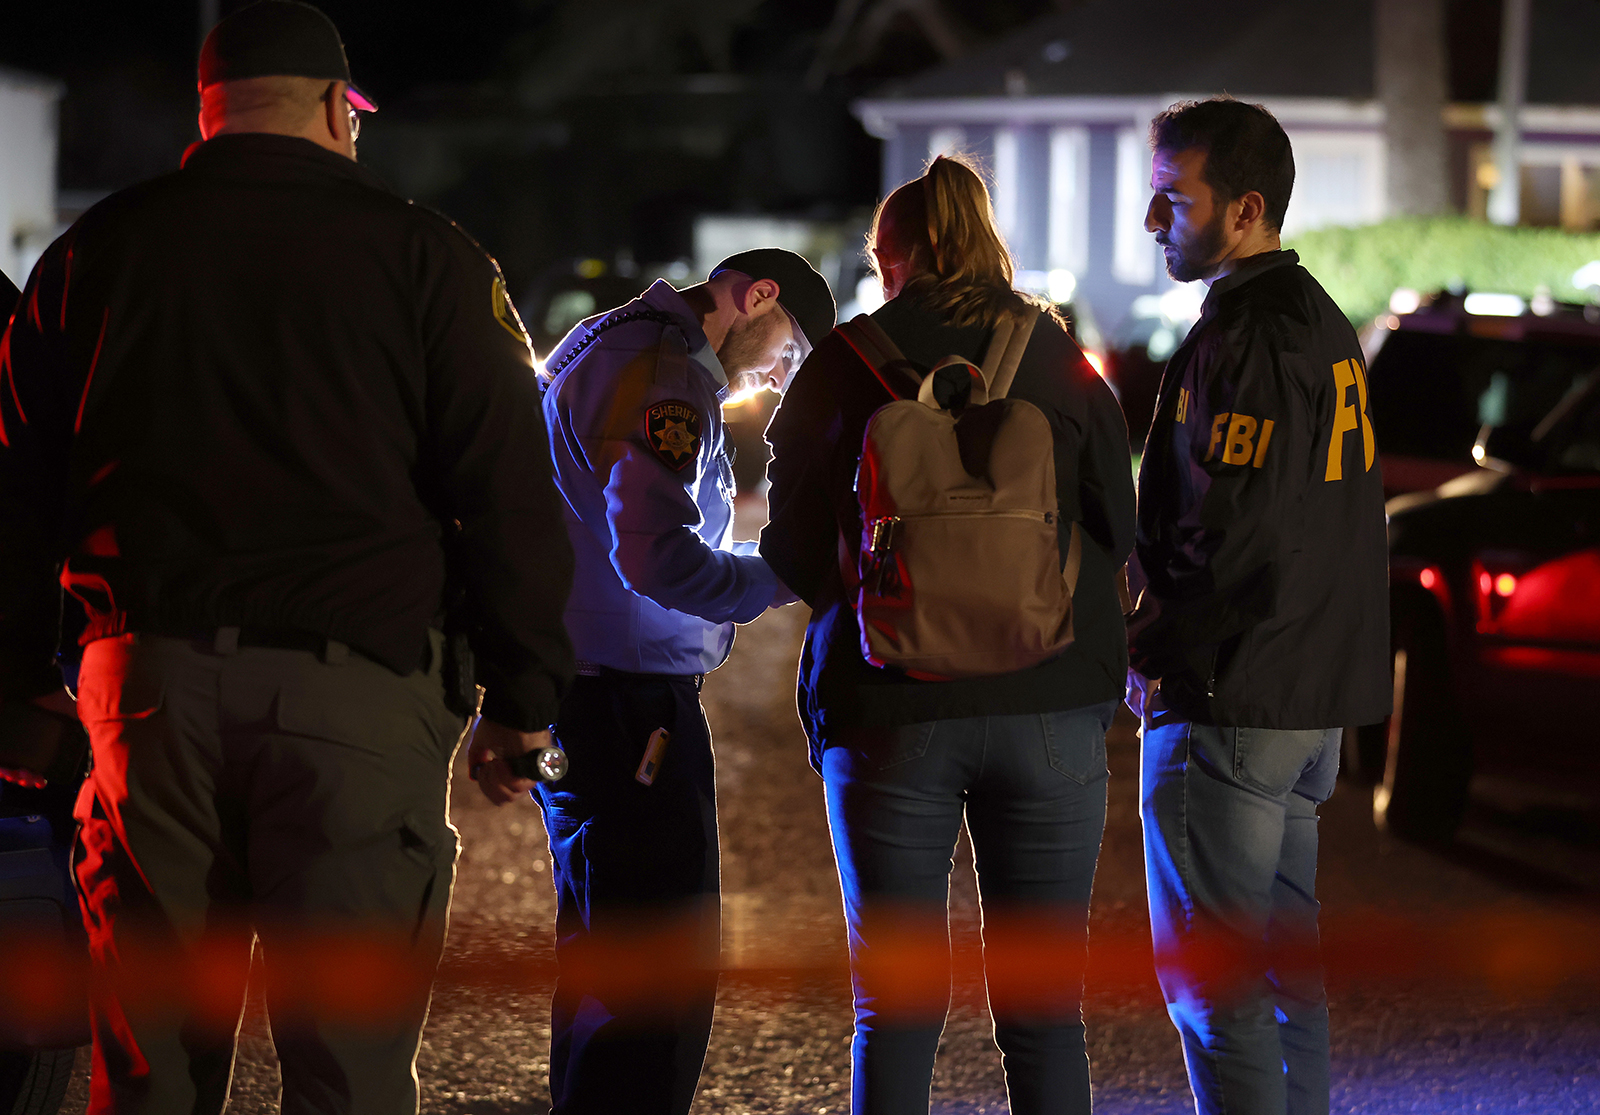 A San Mateo County sheriff deputy checks in FBI agents as they arrive at the scene in Half Moon Bay, California on January 23.